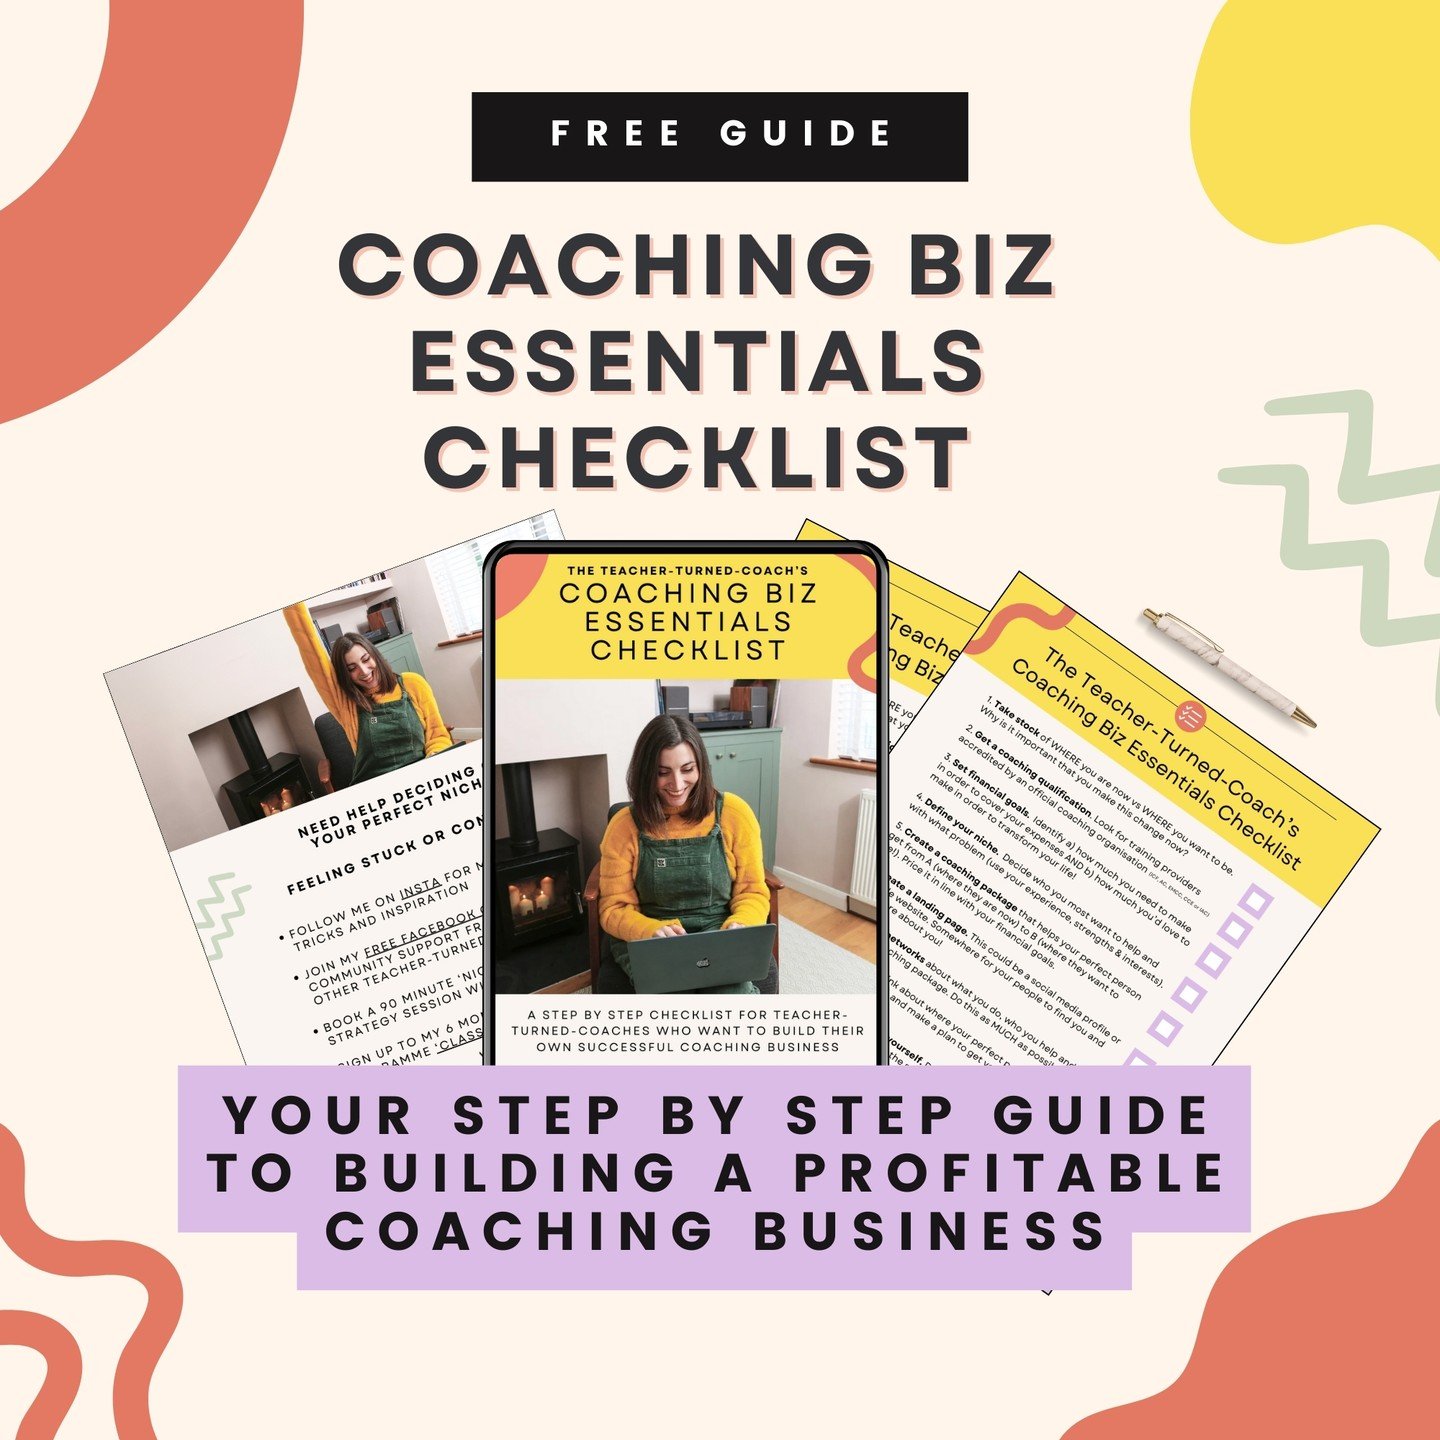 🚀 Wanna know what it REALLY takes to grow a profitable coaching business?

My step-by-step checklist will give you the lowdown to help you get established in the coaching industry, build your brand, find your people, and start making money! 💼💰

Th